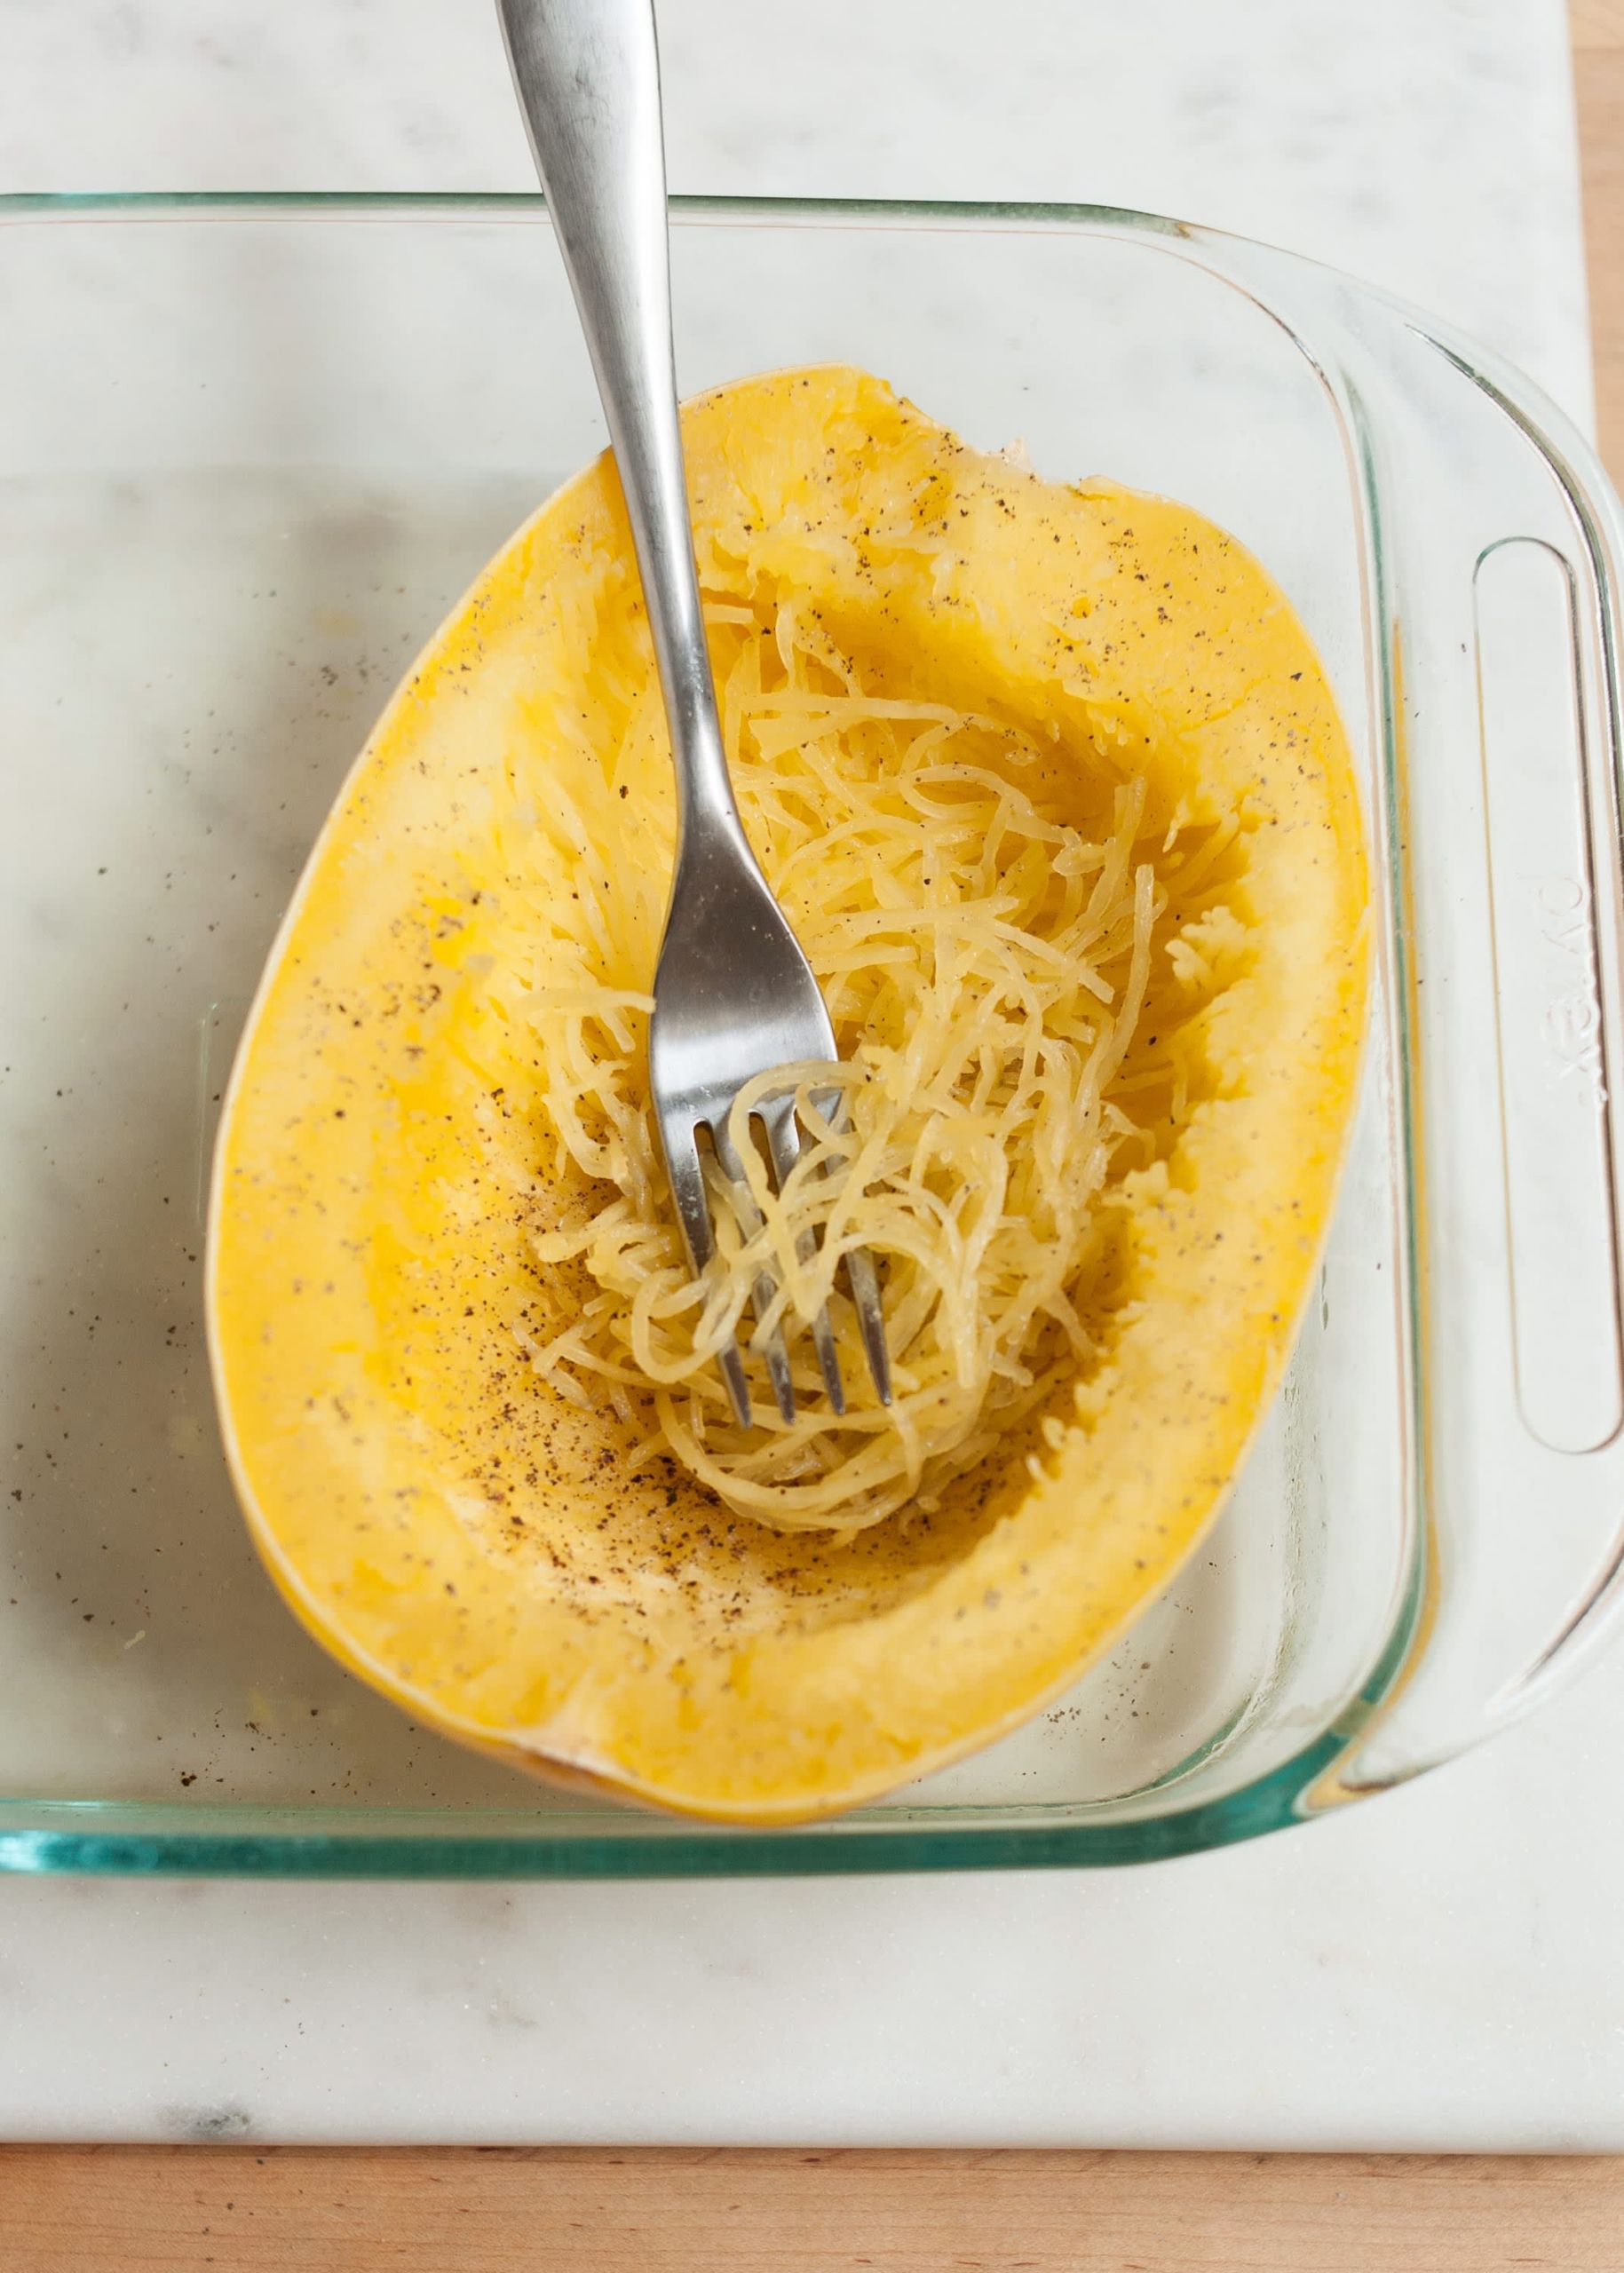 Cooking Spaghetti Squash In The Microwave
 How To Cook Spaghetti Squash in the Microwave